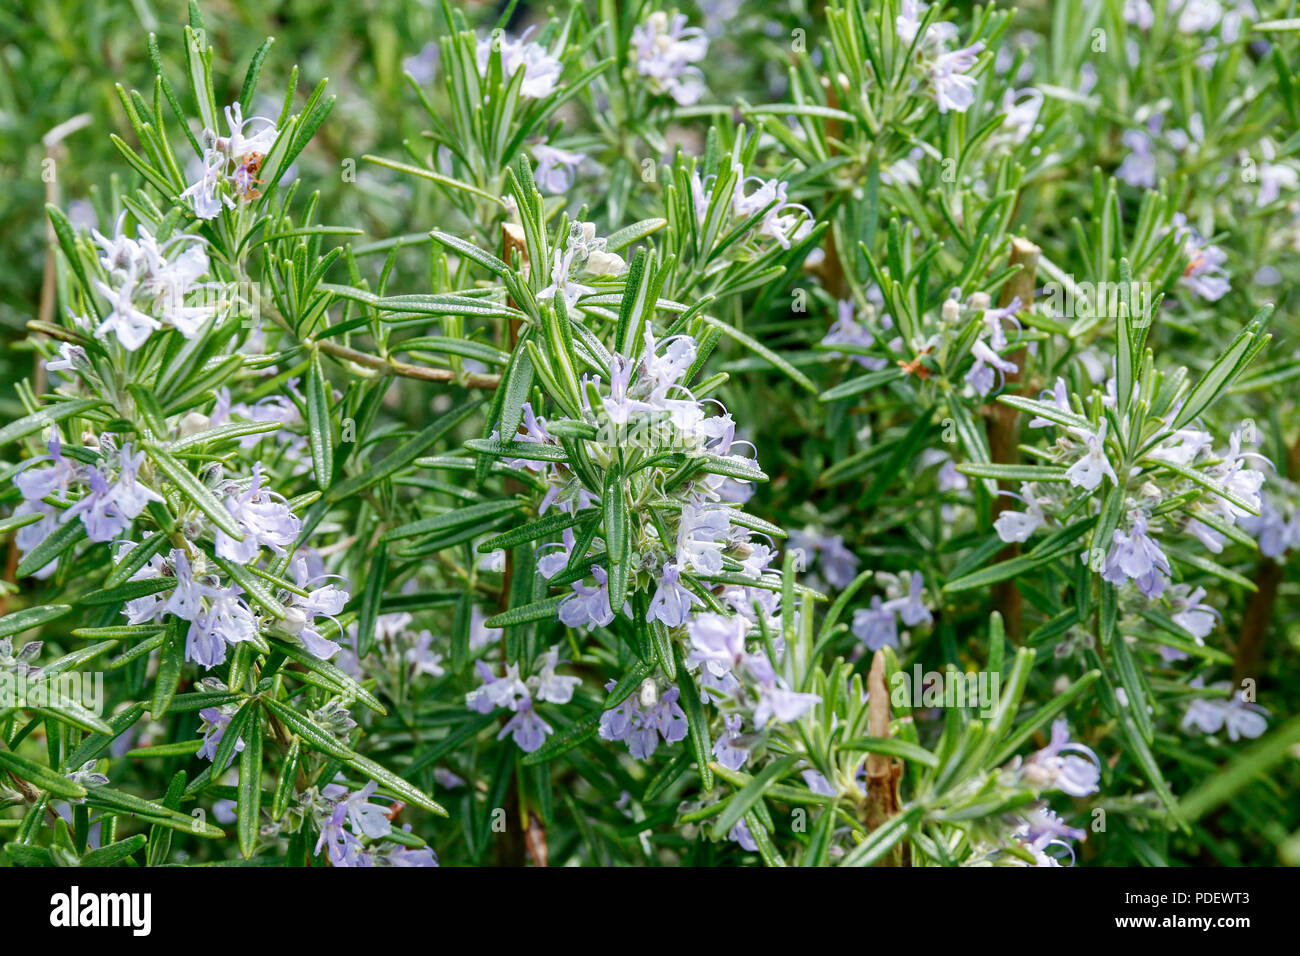 Flowers of Rosemary (Rosmarinus Officinalis), a culinary herb native to the Mediterranean region Stock Photo